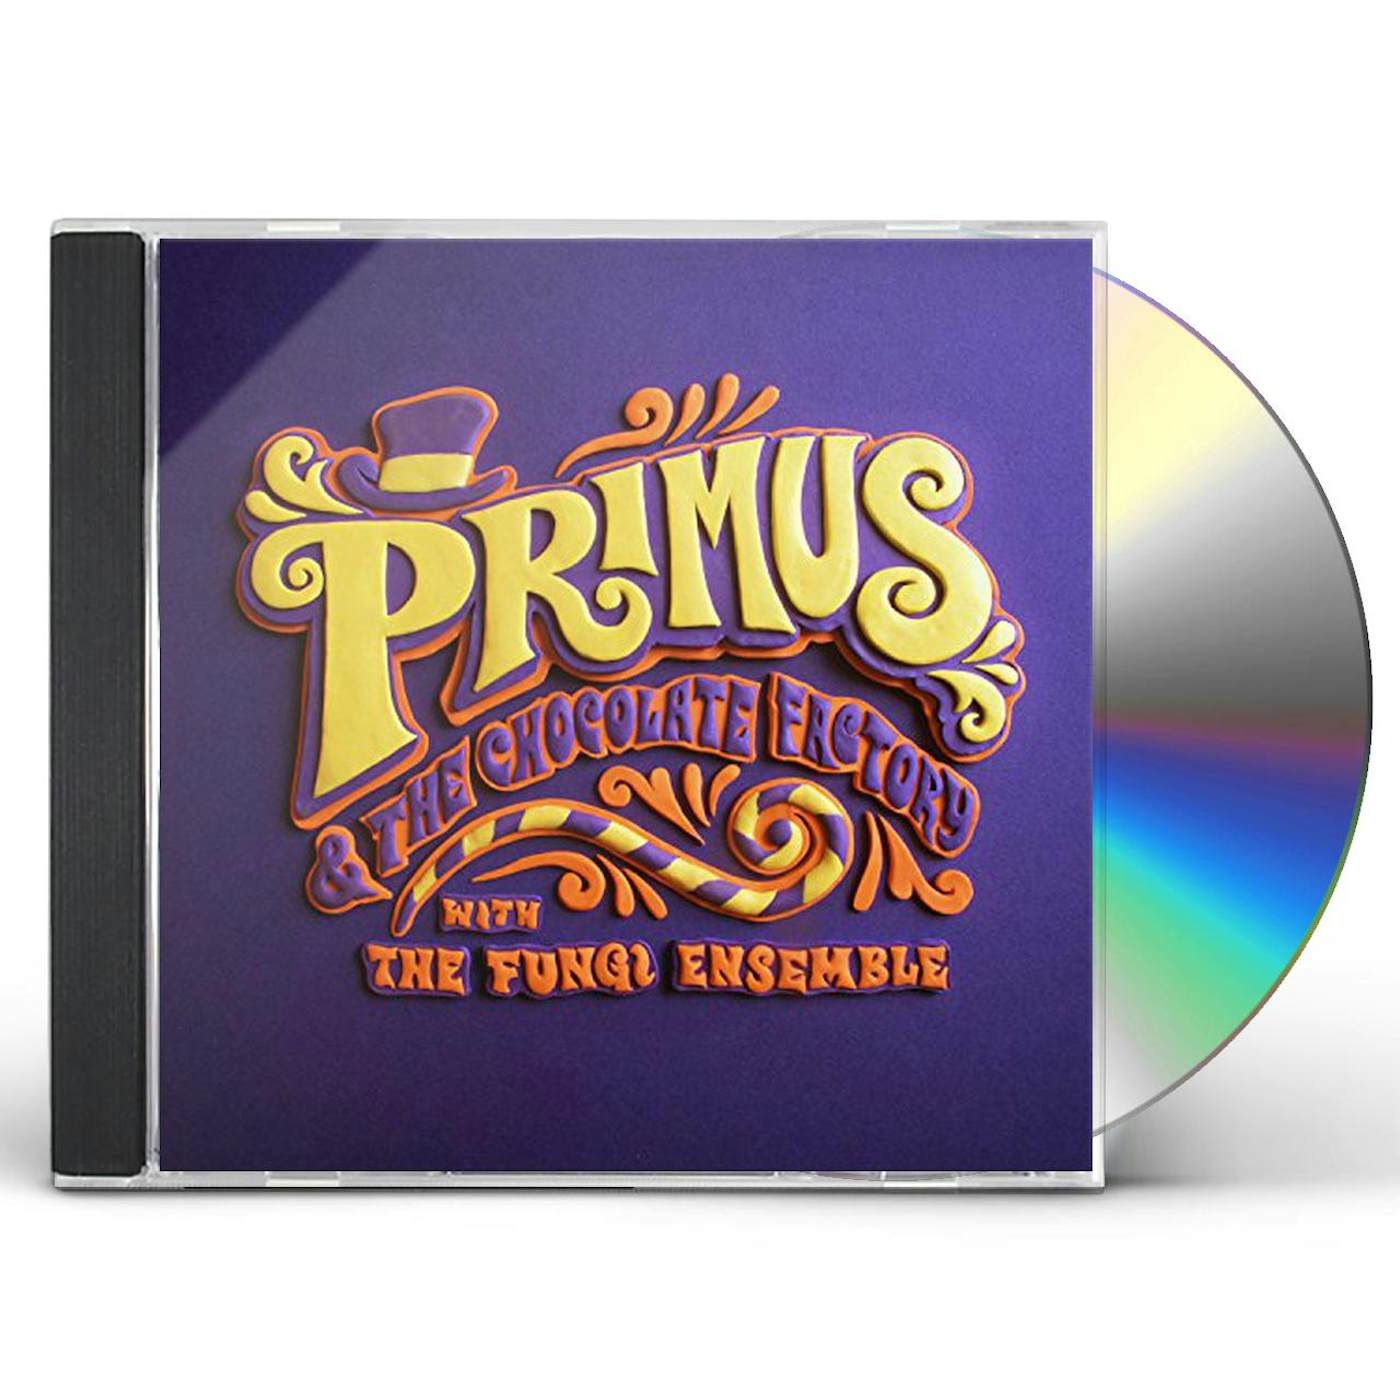 PRIMUS & THE CHOCOLATE FACTORY WITH THE FUNGI ENSE CD